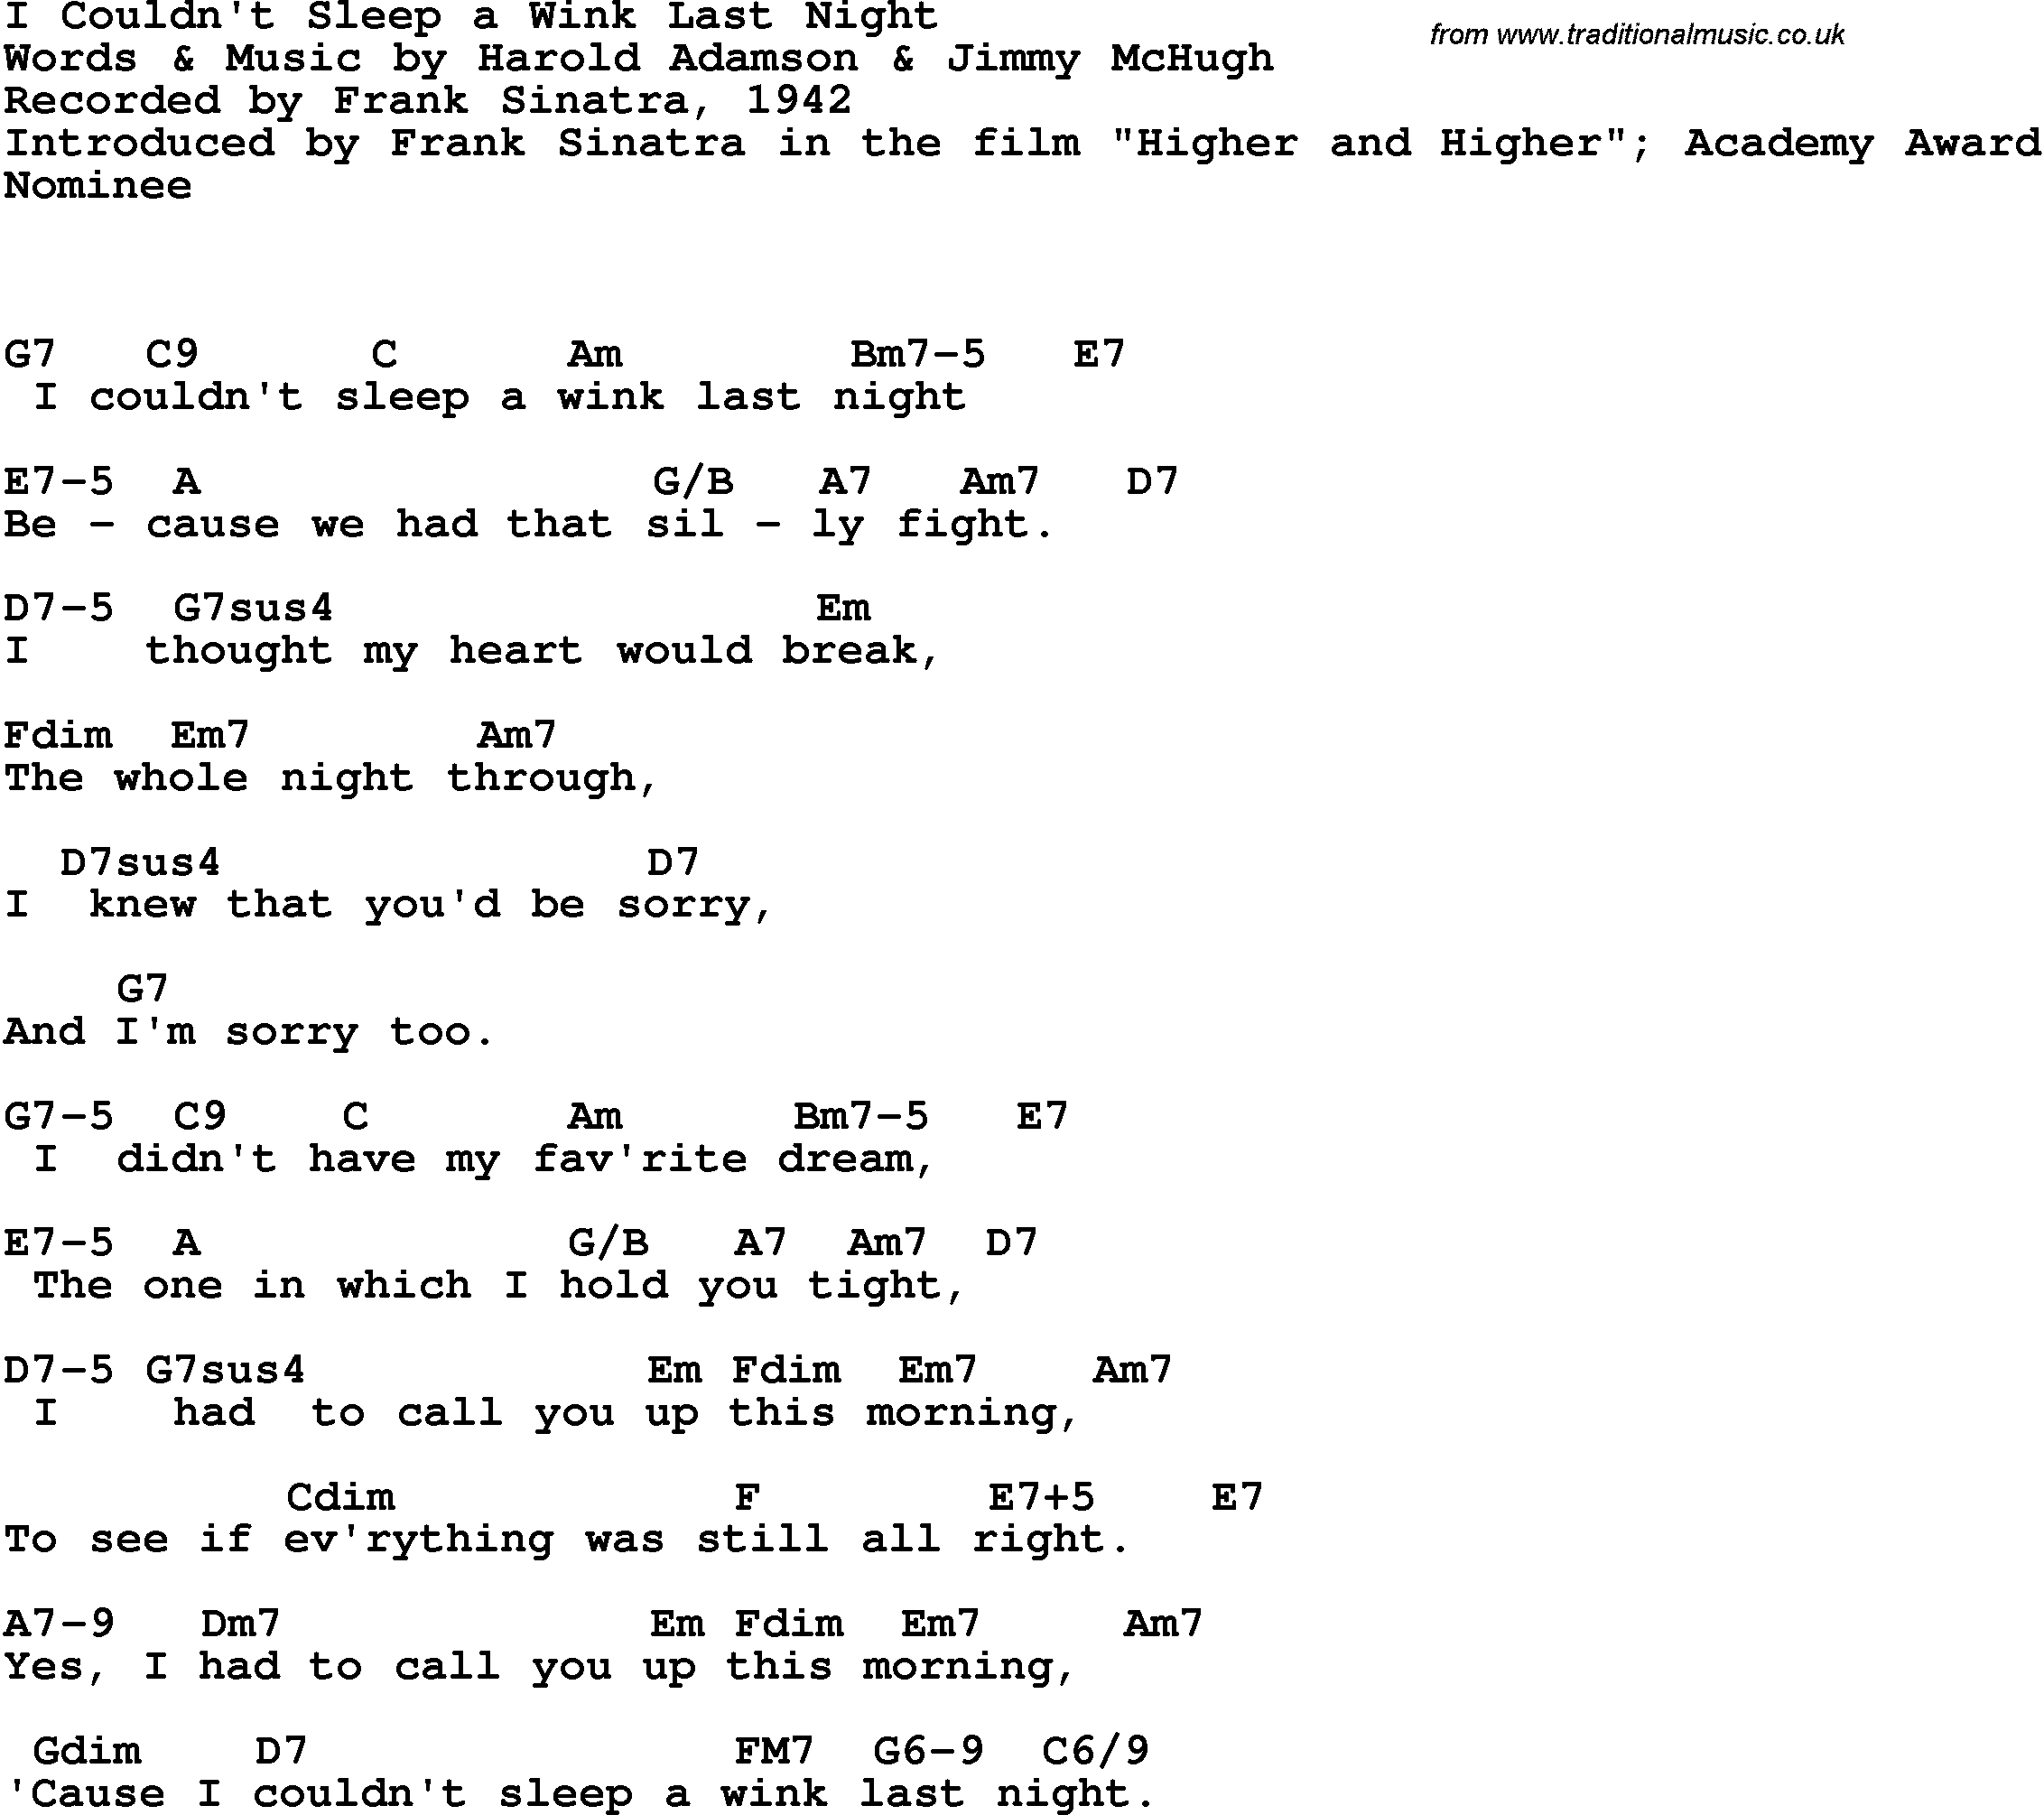 Song Lyrics with guitar chords for I Couldn't Sleep A Wink Last Night - Frank Sinatra, 1942